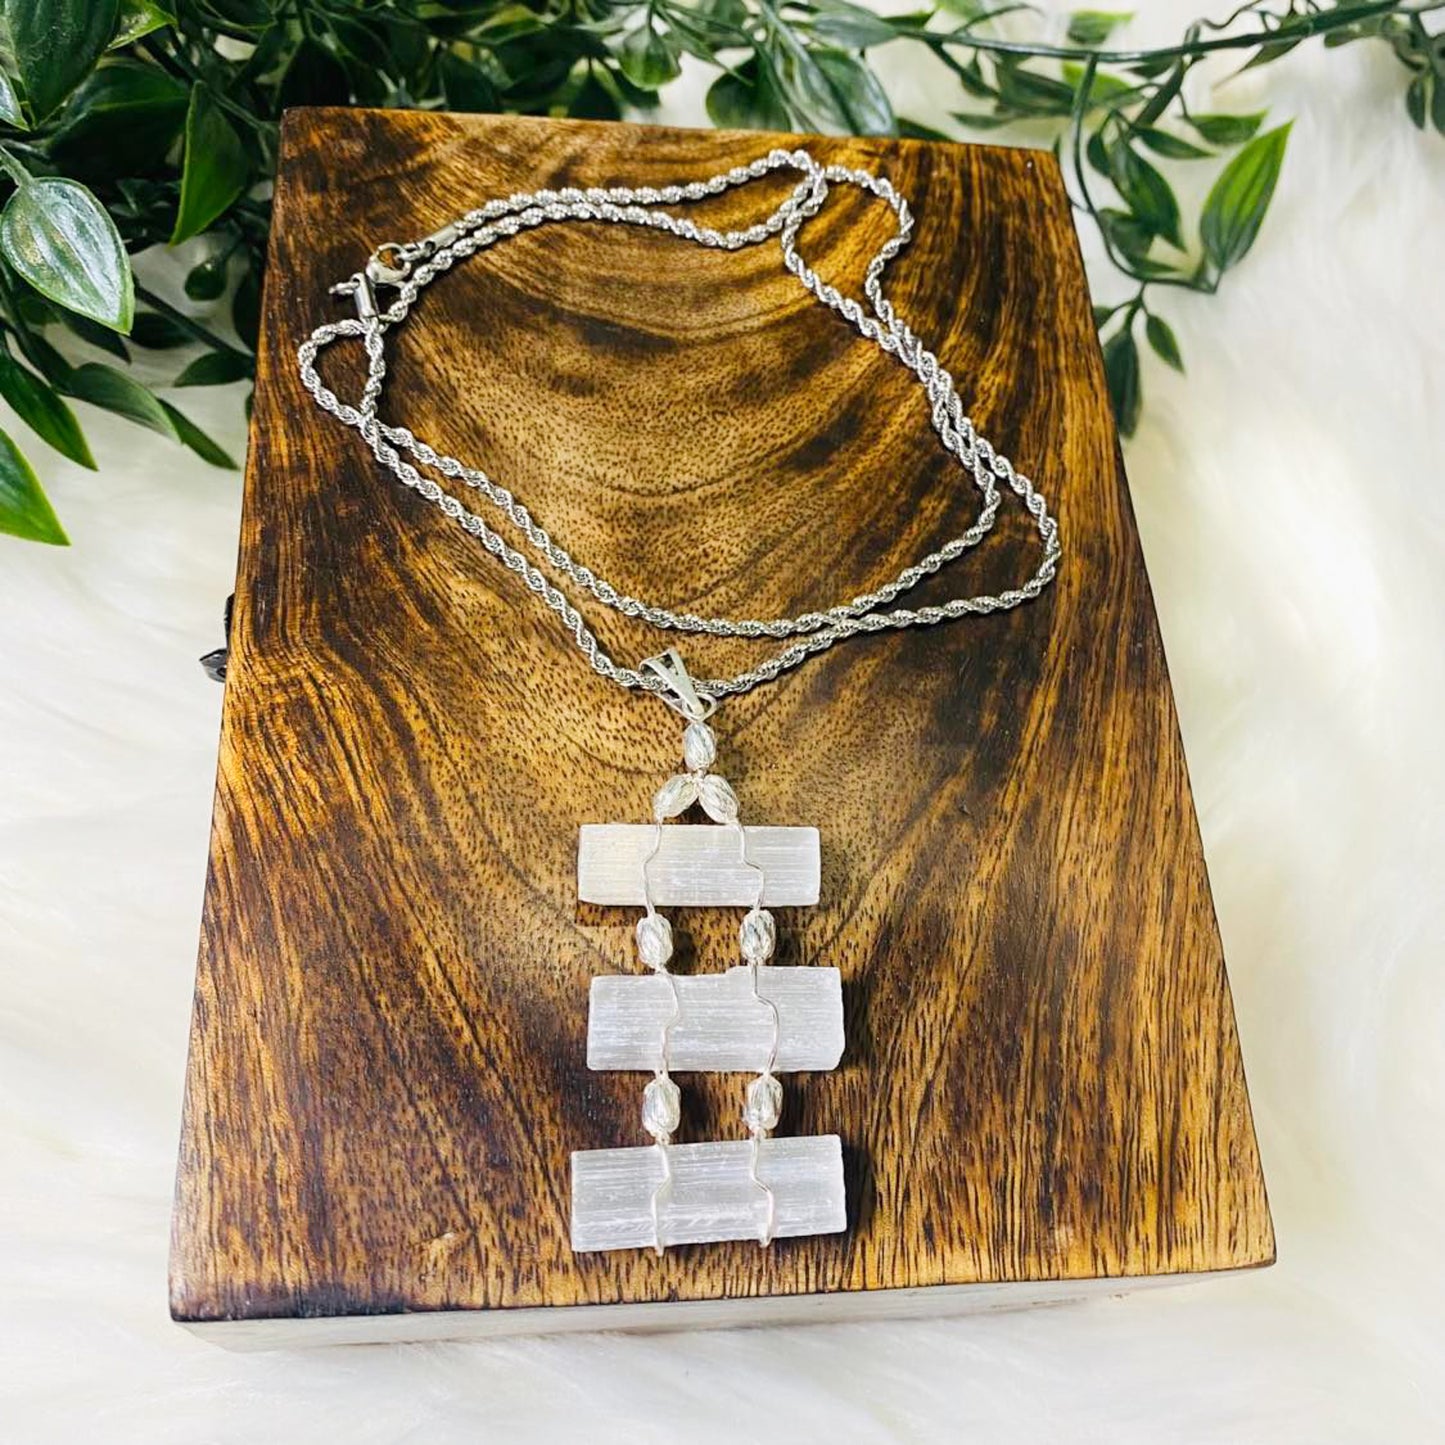 Raw Selenite Crystal Necklace with Silver Chain